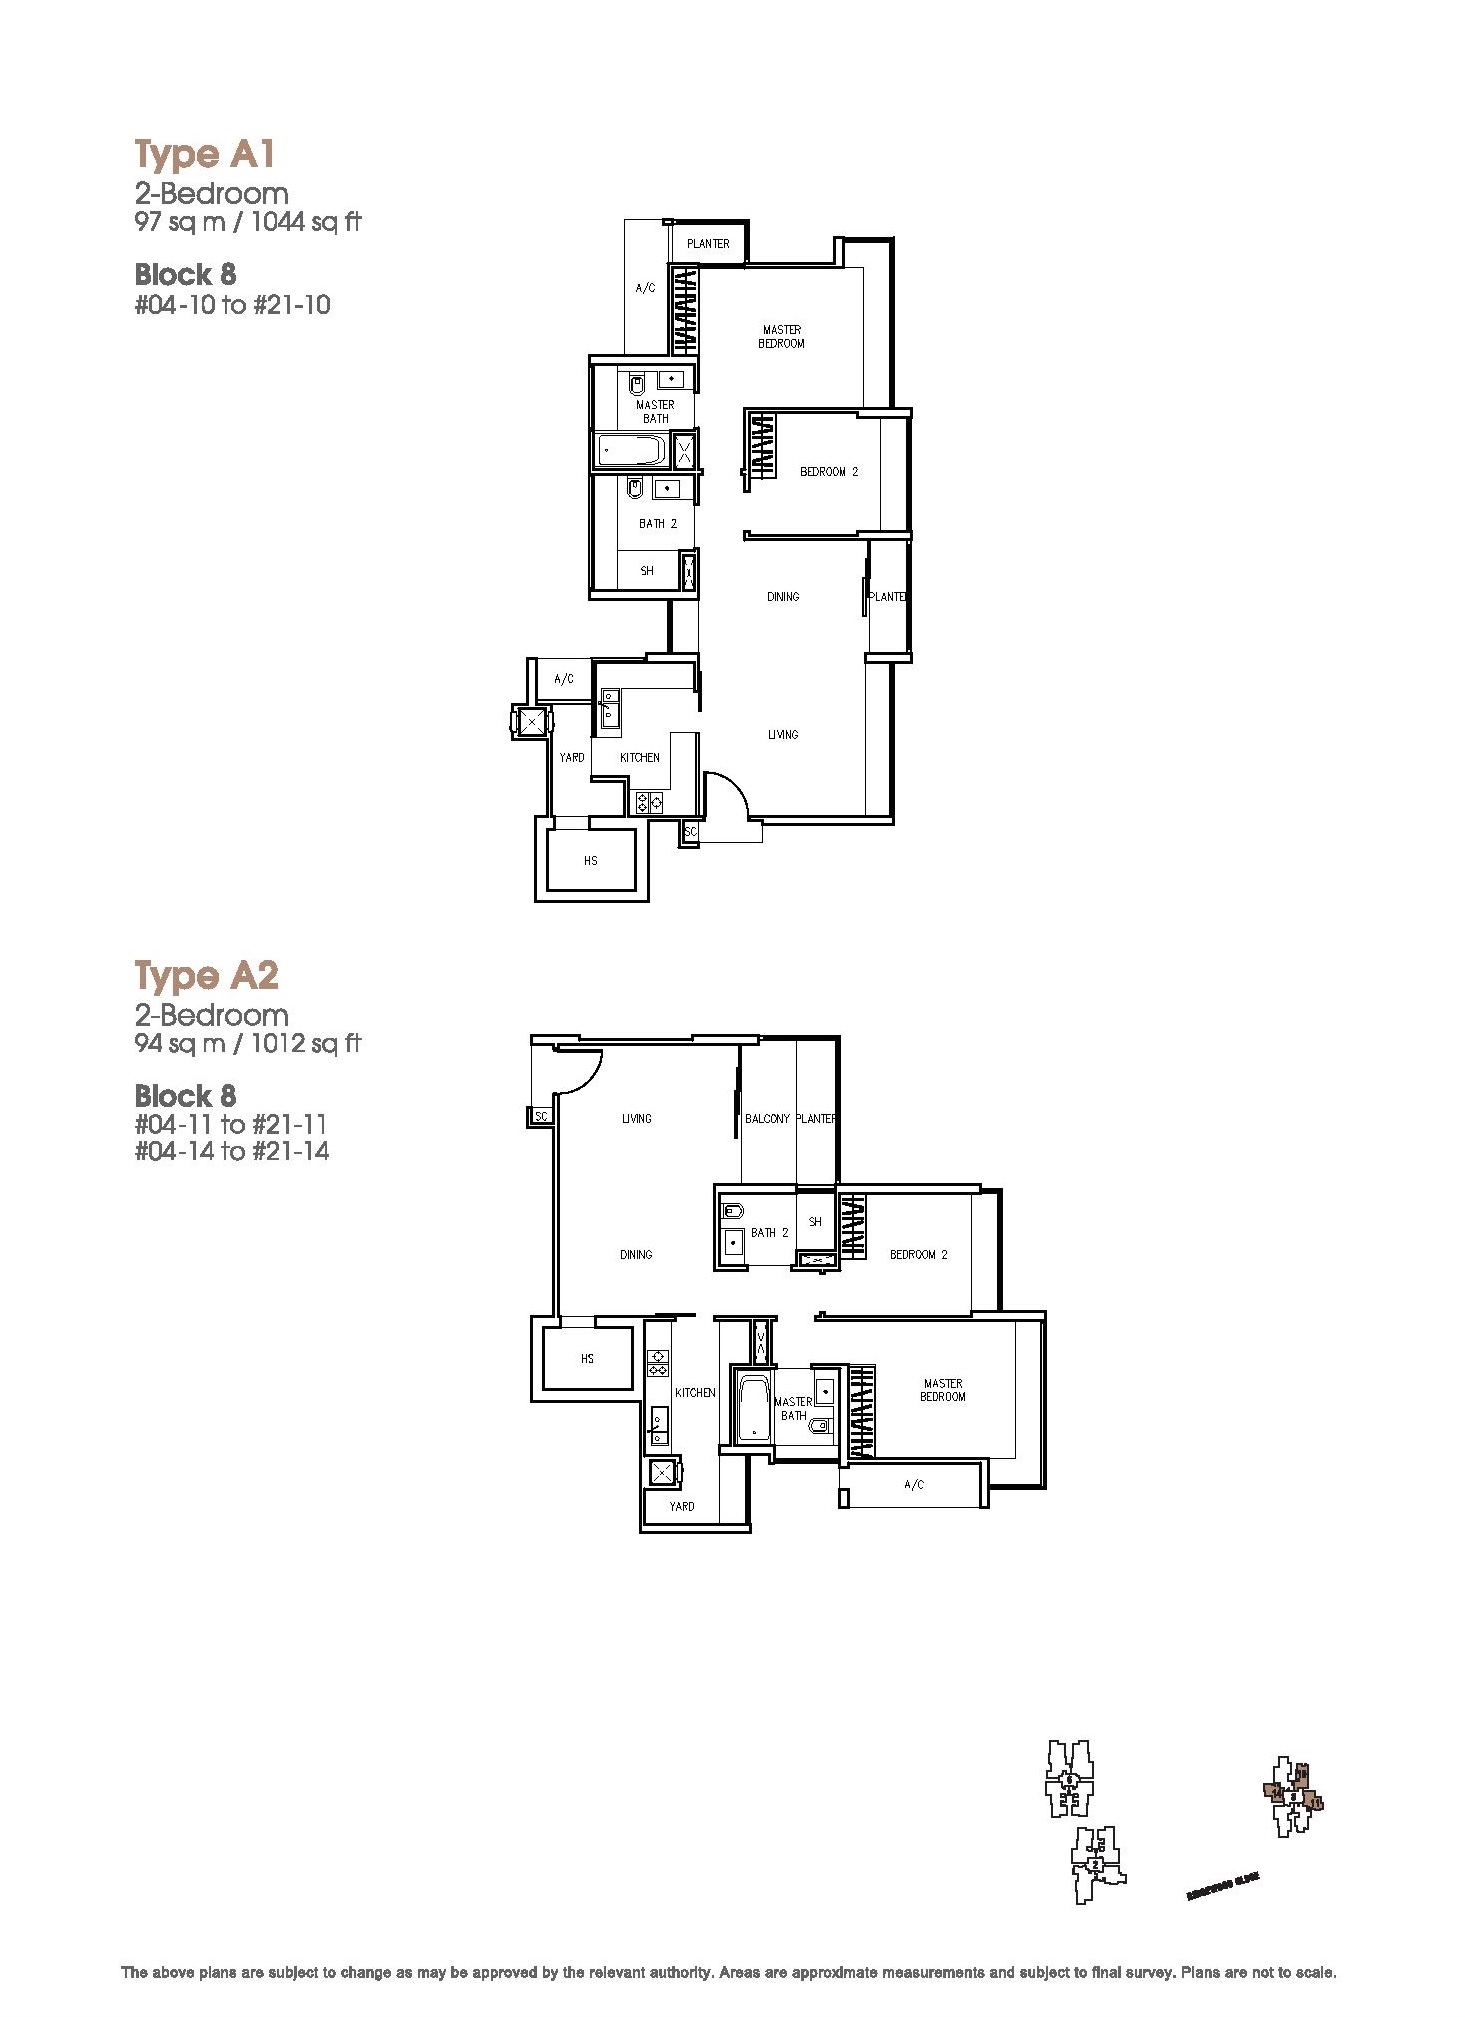 The Trizon 2 Bedroom Floor Plans Type A1 and A2